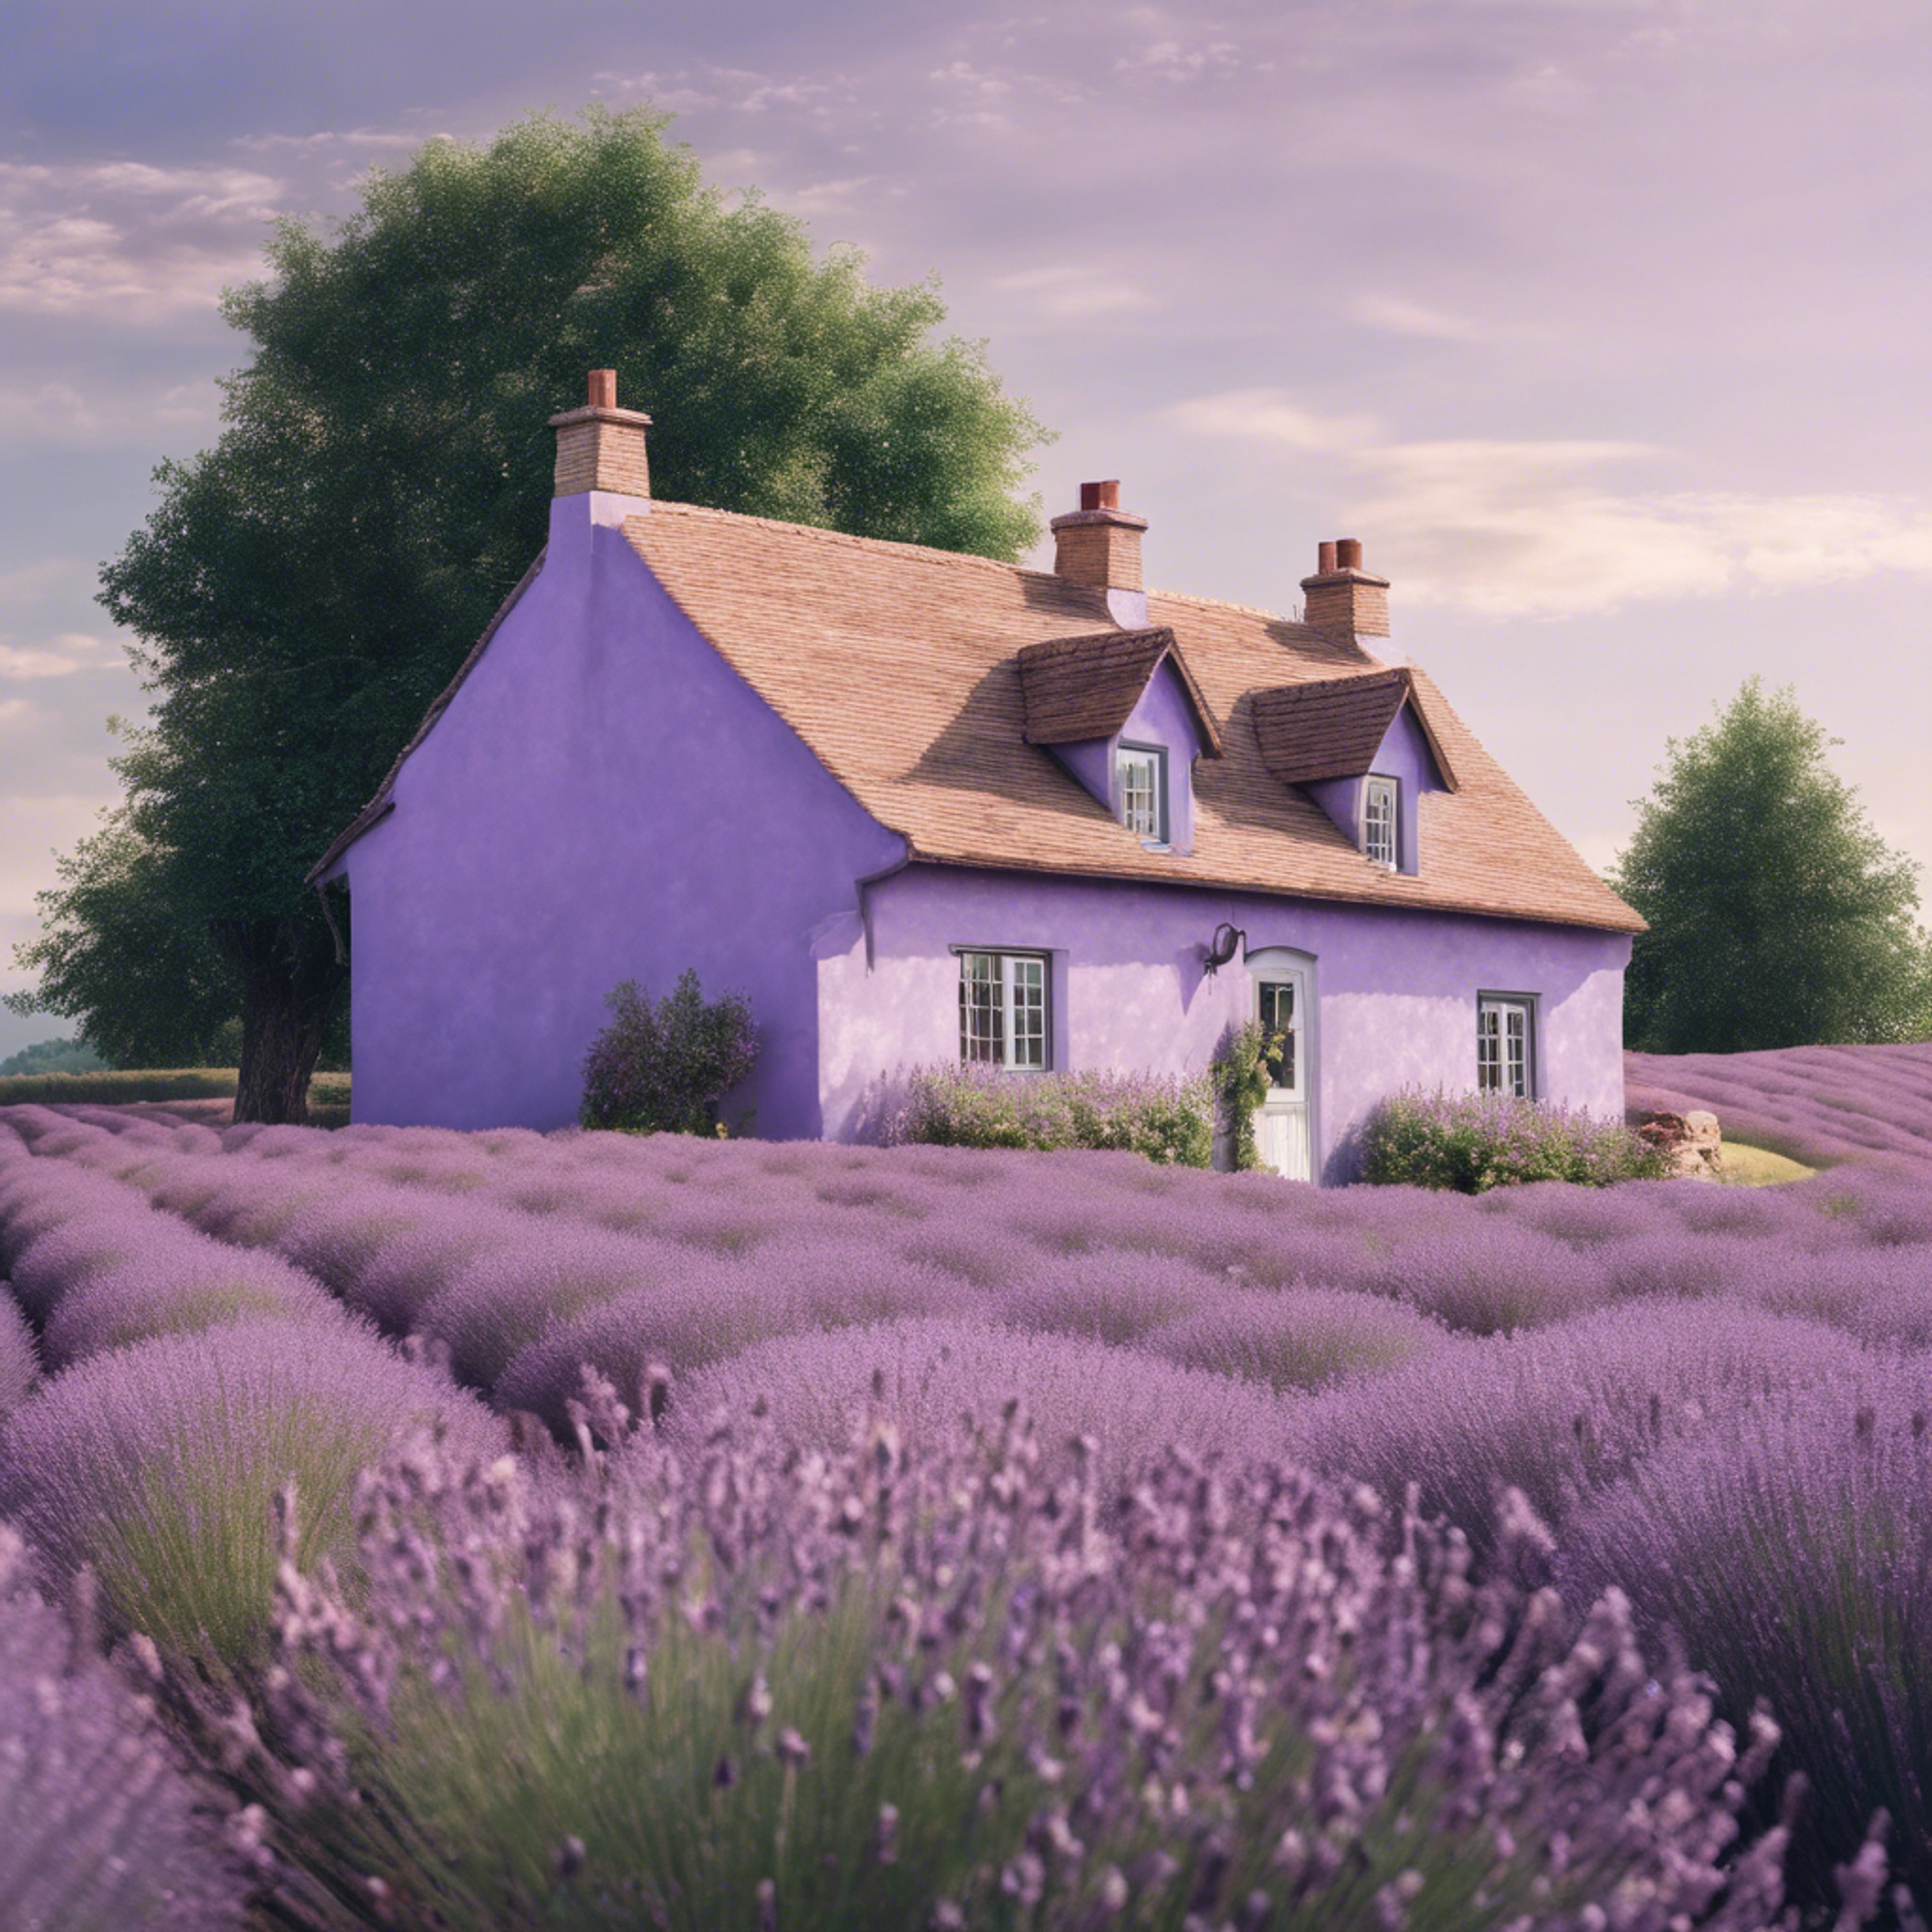 A quaint pastel purple cottage in the countryside surrounded by lavender fields. Tapet[9ff1532238764d01813b]